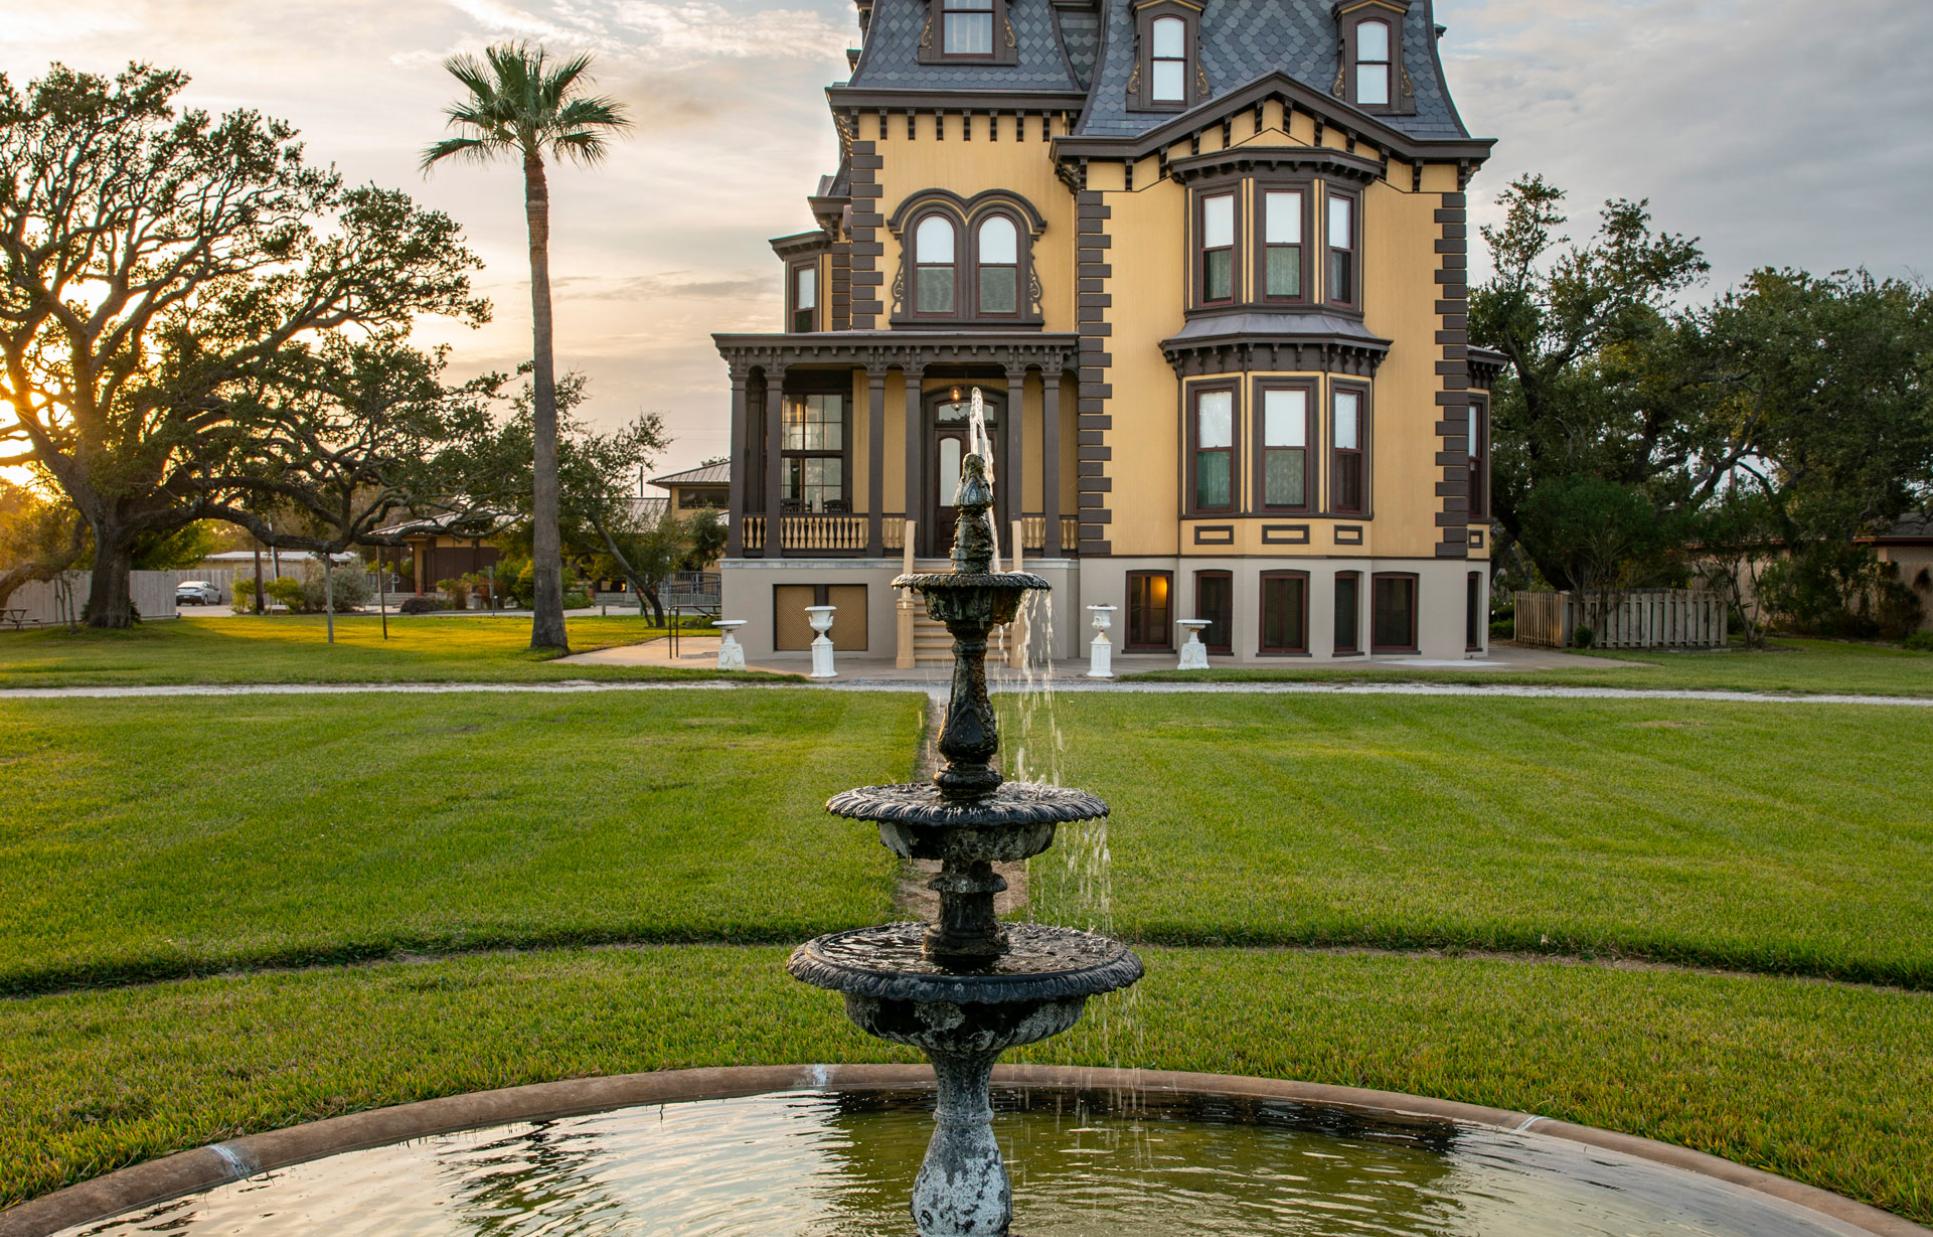 Fountain in front of mansion during sunset